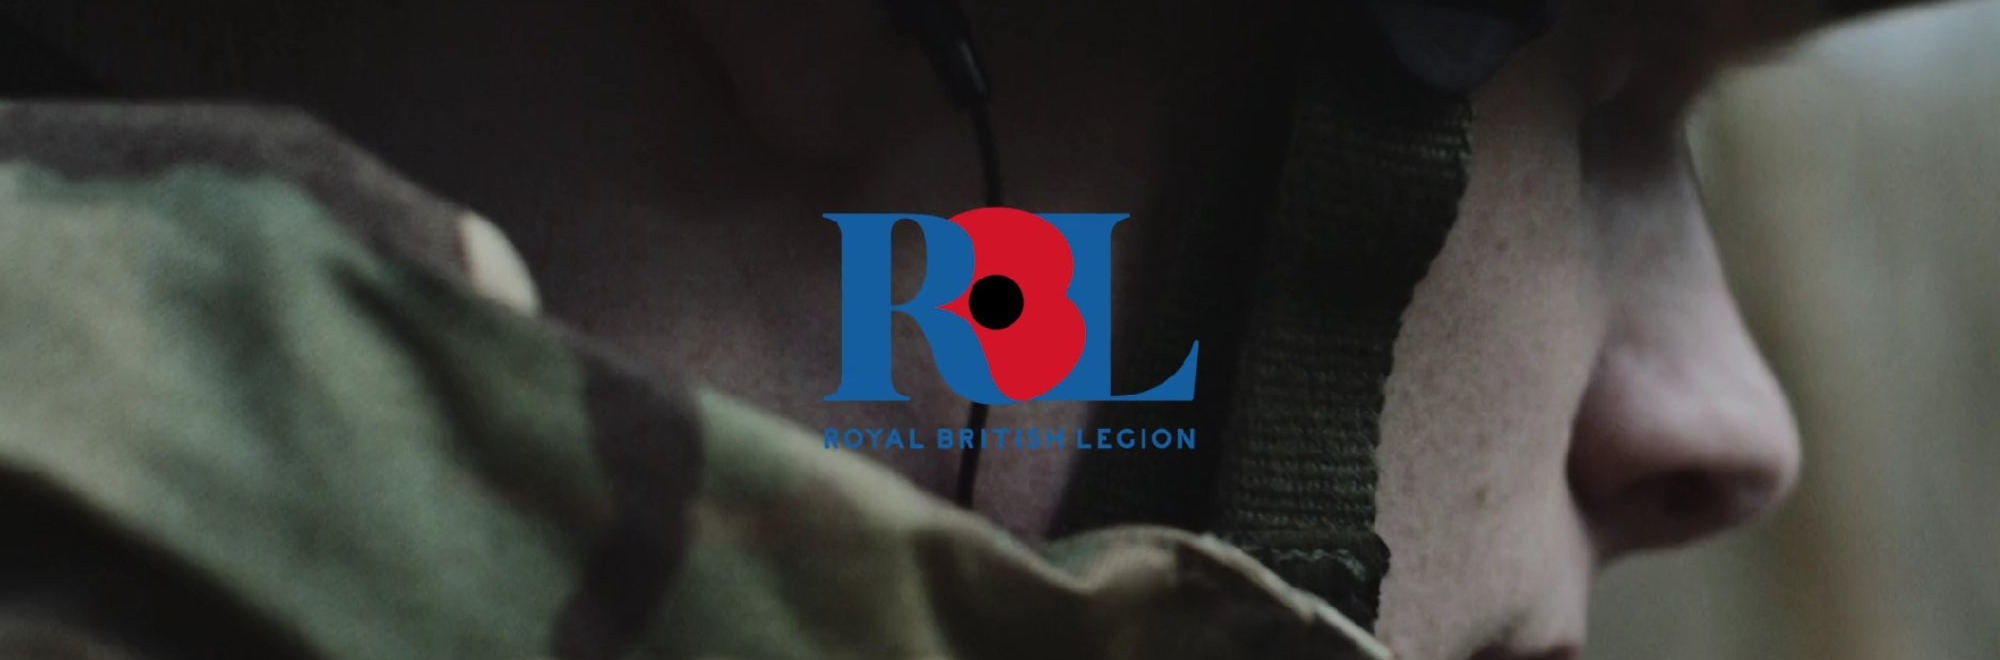 Royal British Legion launches ‘What They Won’t Tell You’ campaign